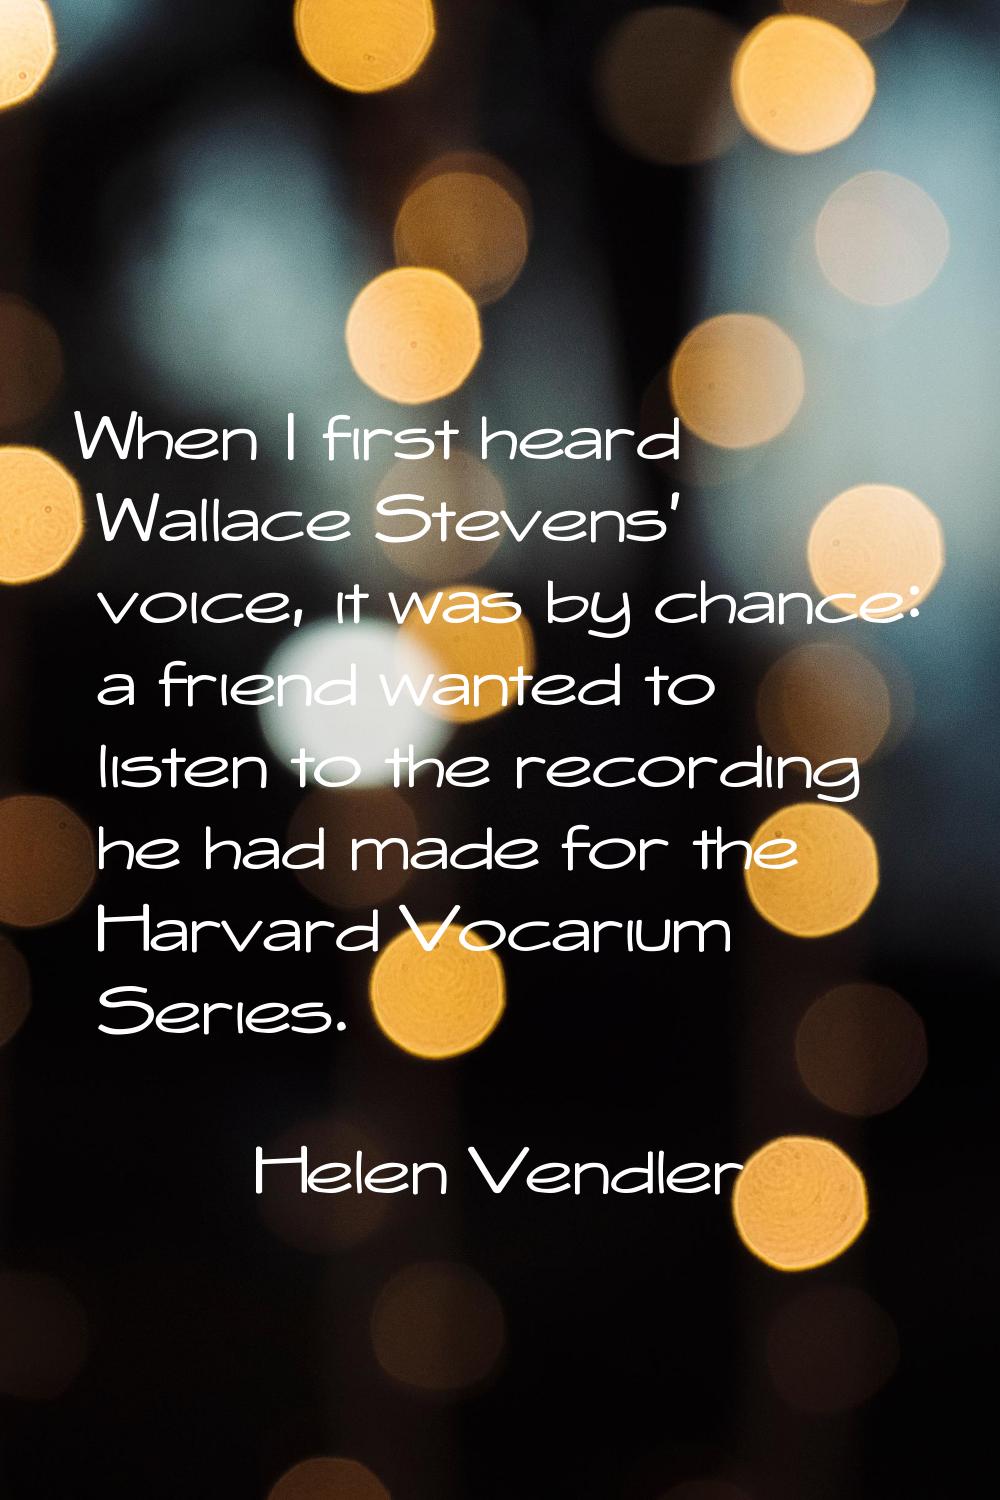 When I first heard Wallace Stevens' voice, it was by chance: a friend wanted to listen to the recor